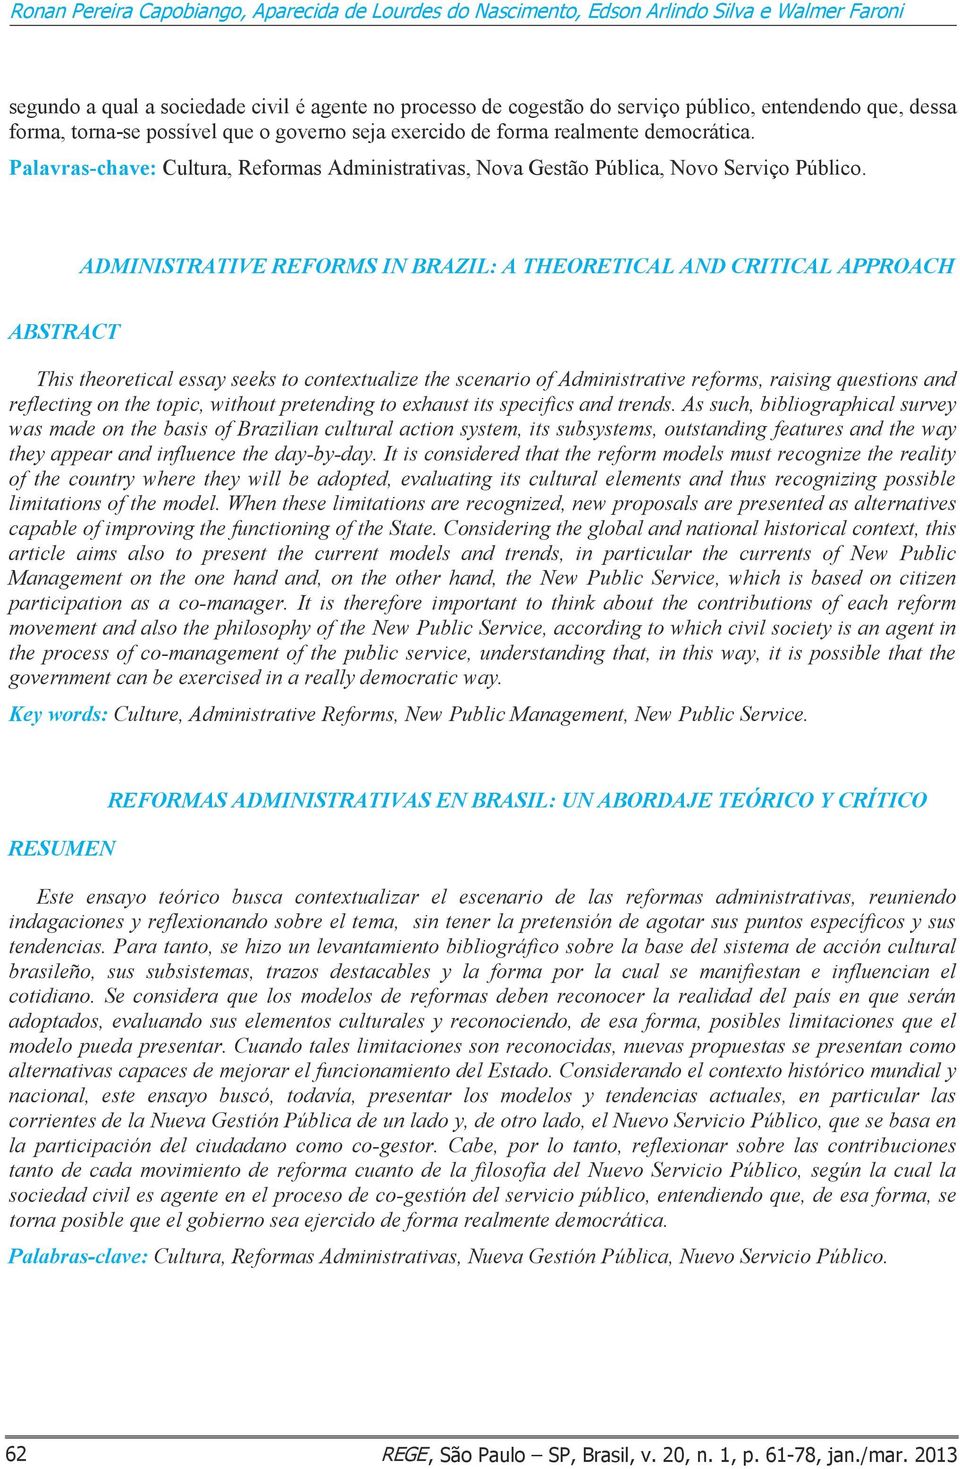 ADMINISTRATIVE REFORMS IN BRAZIL: A THEORETICAL AND CRITICAL APPROACH ABSTRACT This theoretical essay seeks to contextualize the scenario of Administrative reforms, raising questions and reflecting